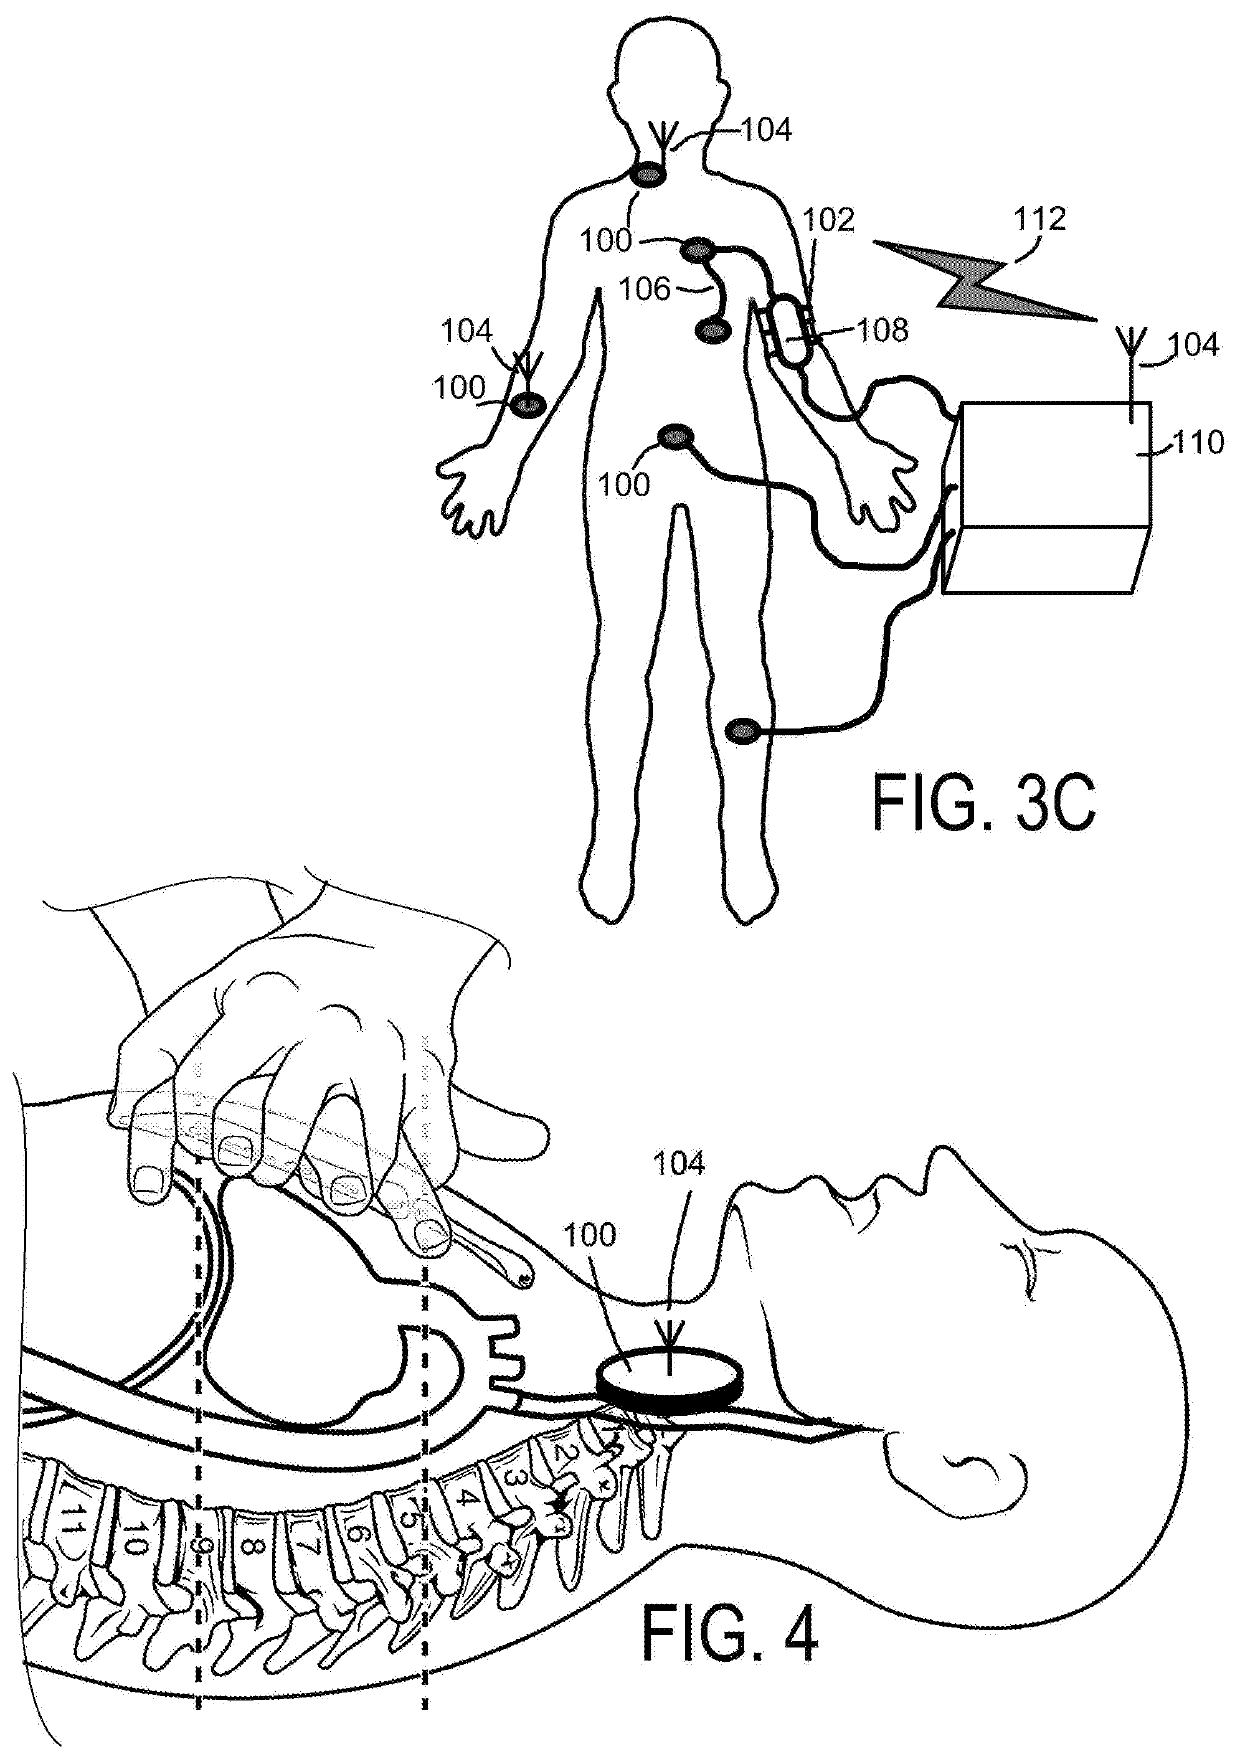 Diagnostic ultrasound monitoring system and method